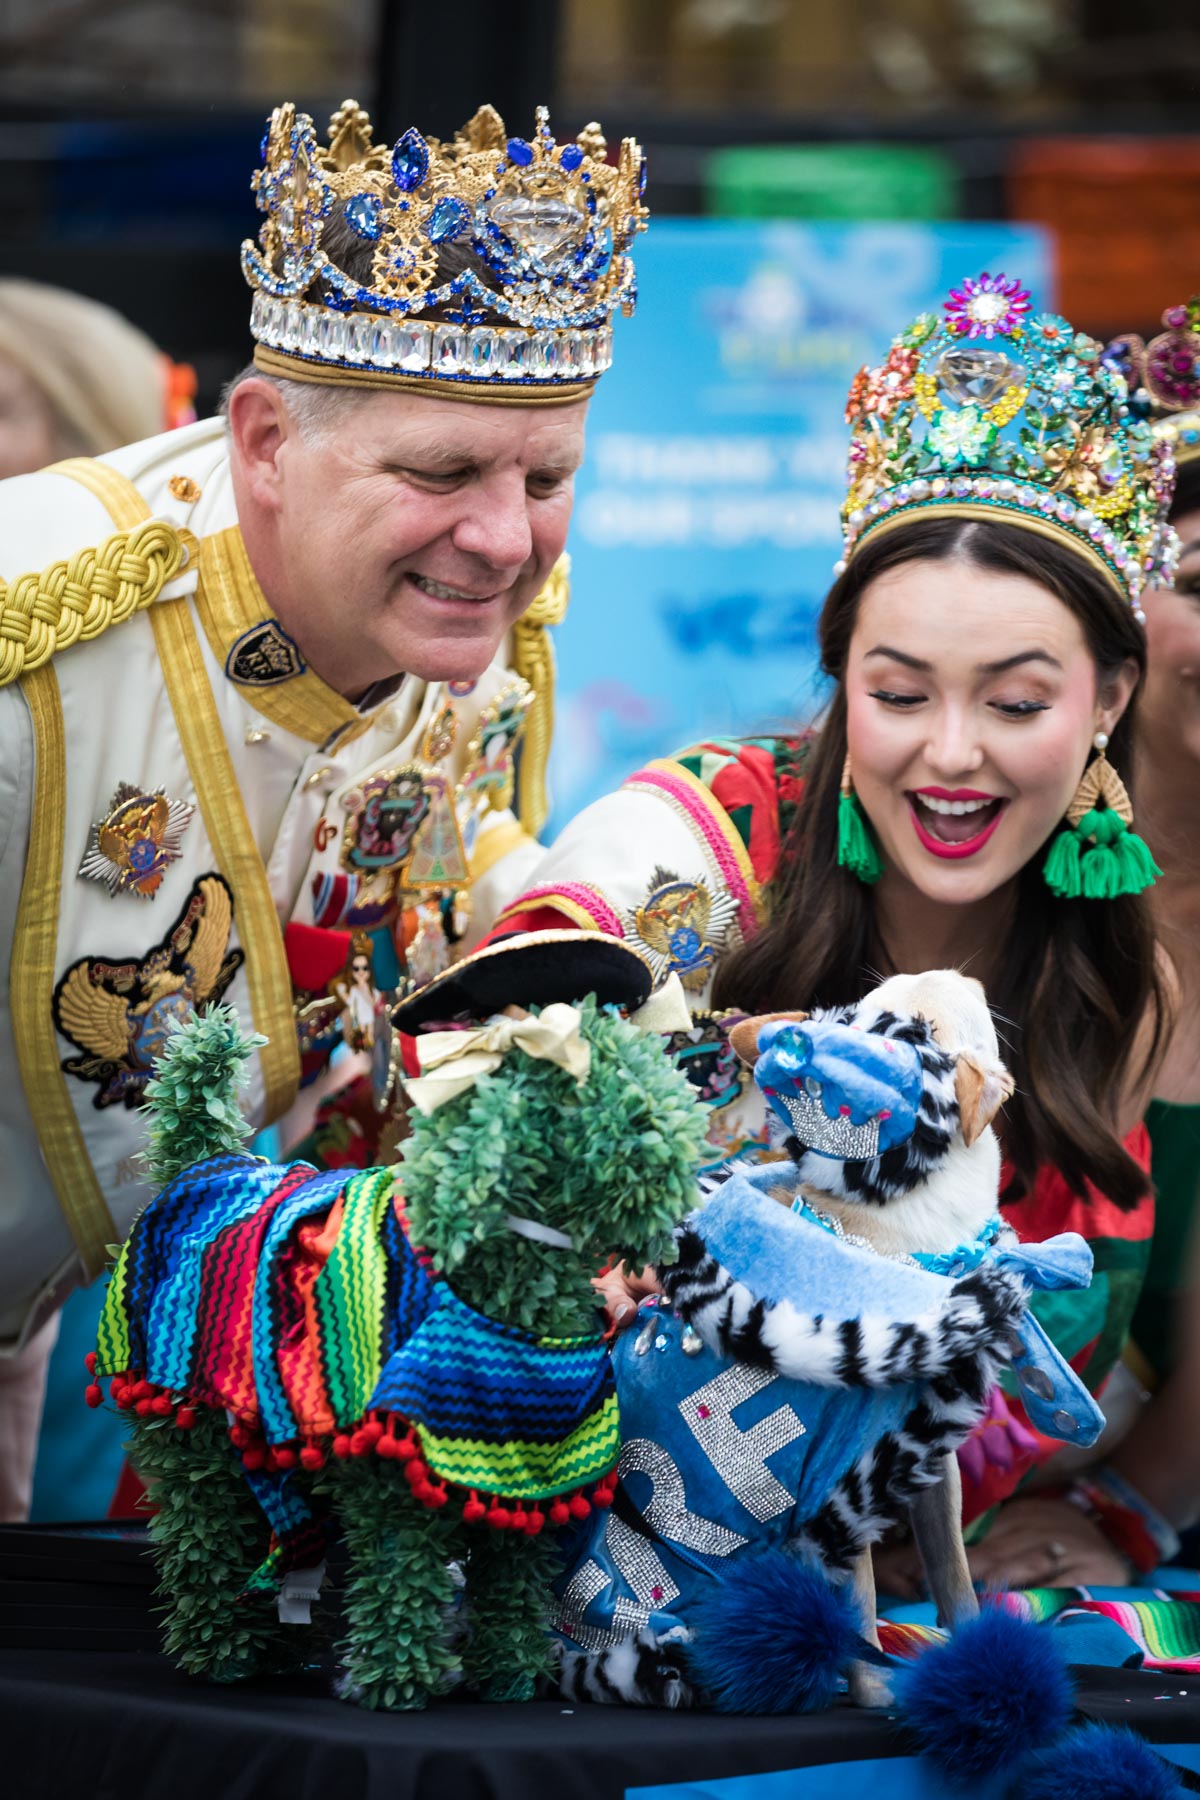 Rey Feo and other royalty looking at dog during Rey Fido event for an article on the best Fiesta photos